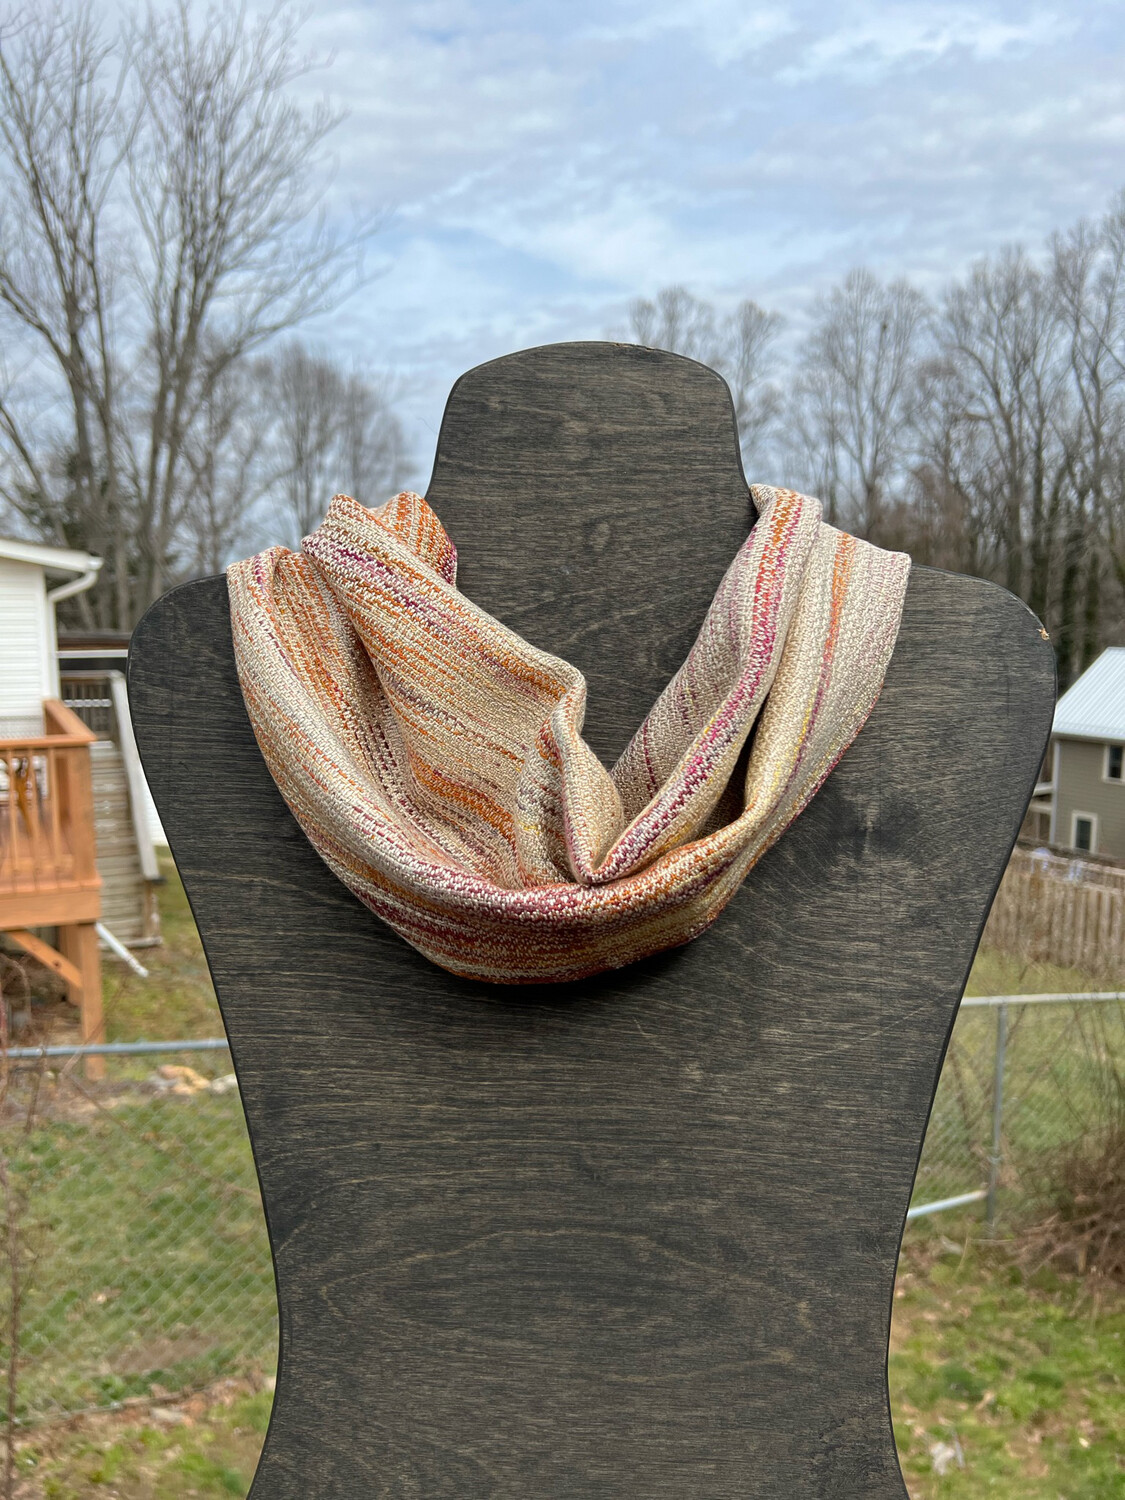 Handwoven Handdyed Cowl Seacell/Tencel